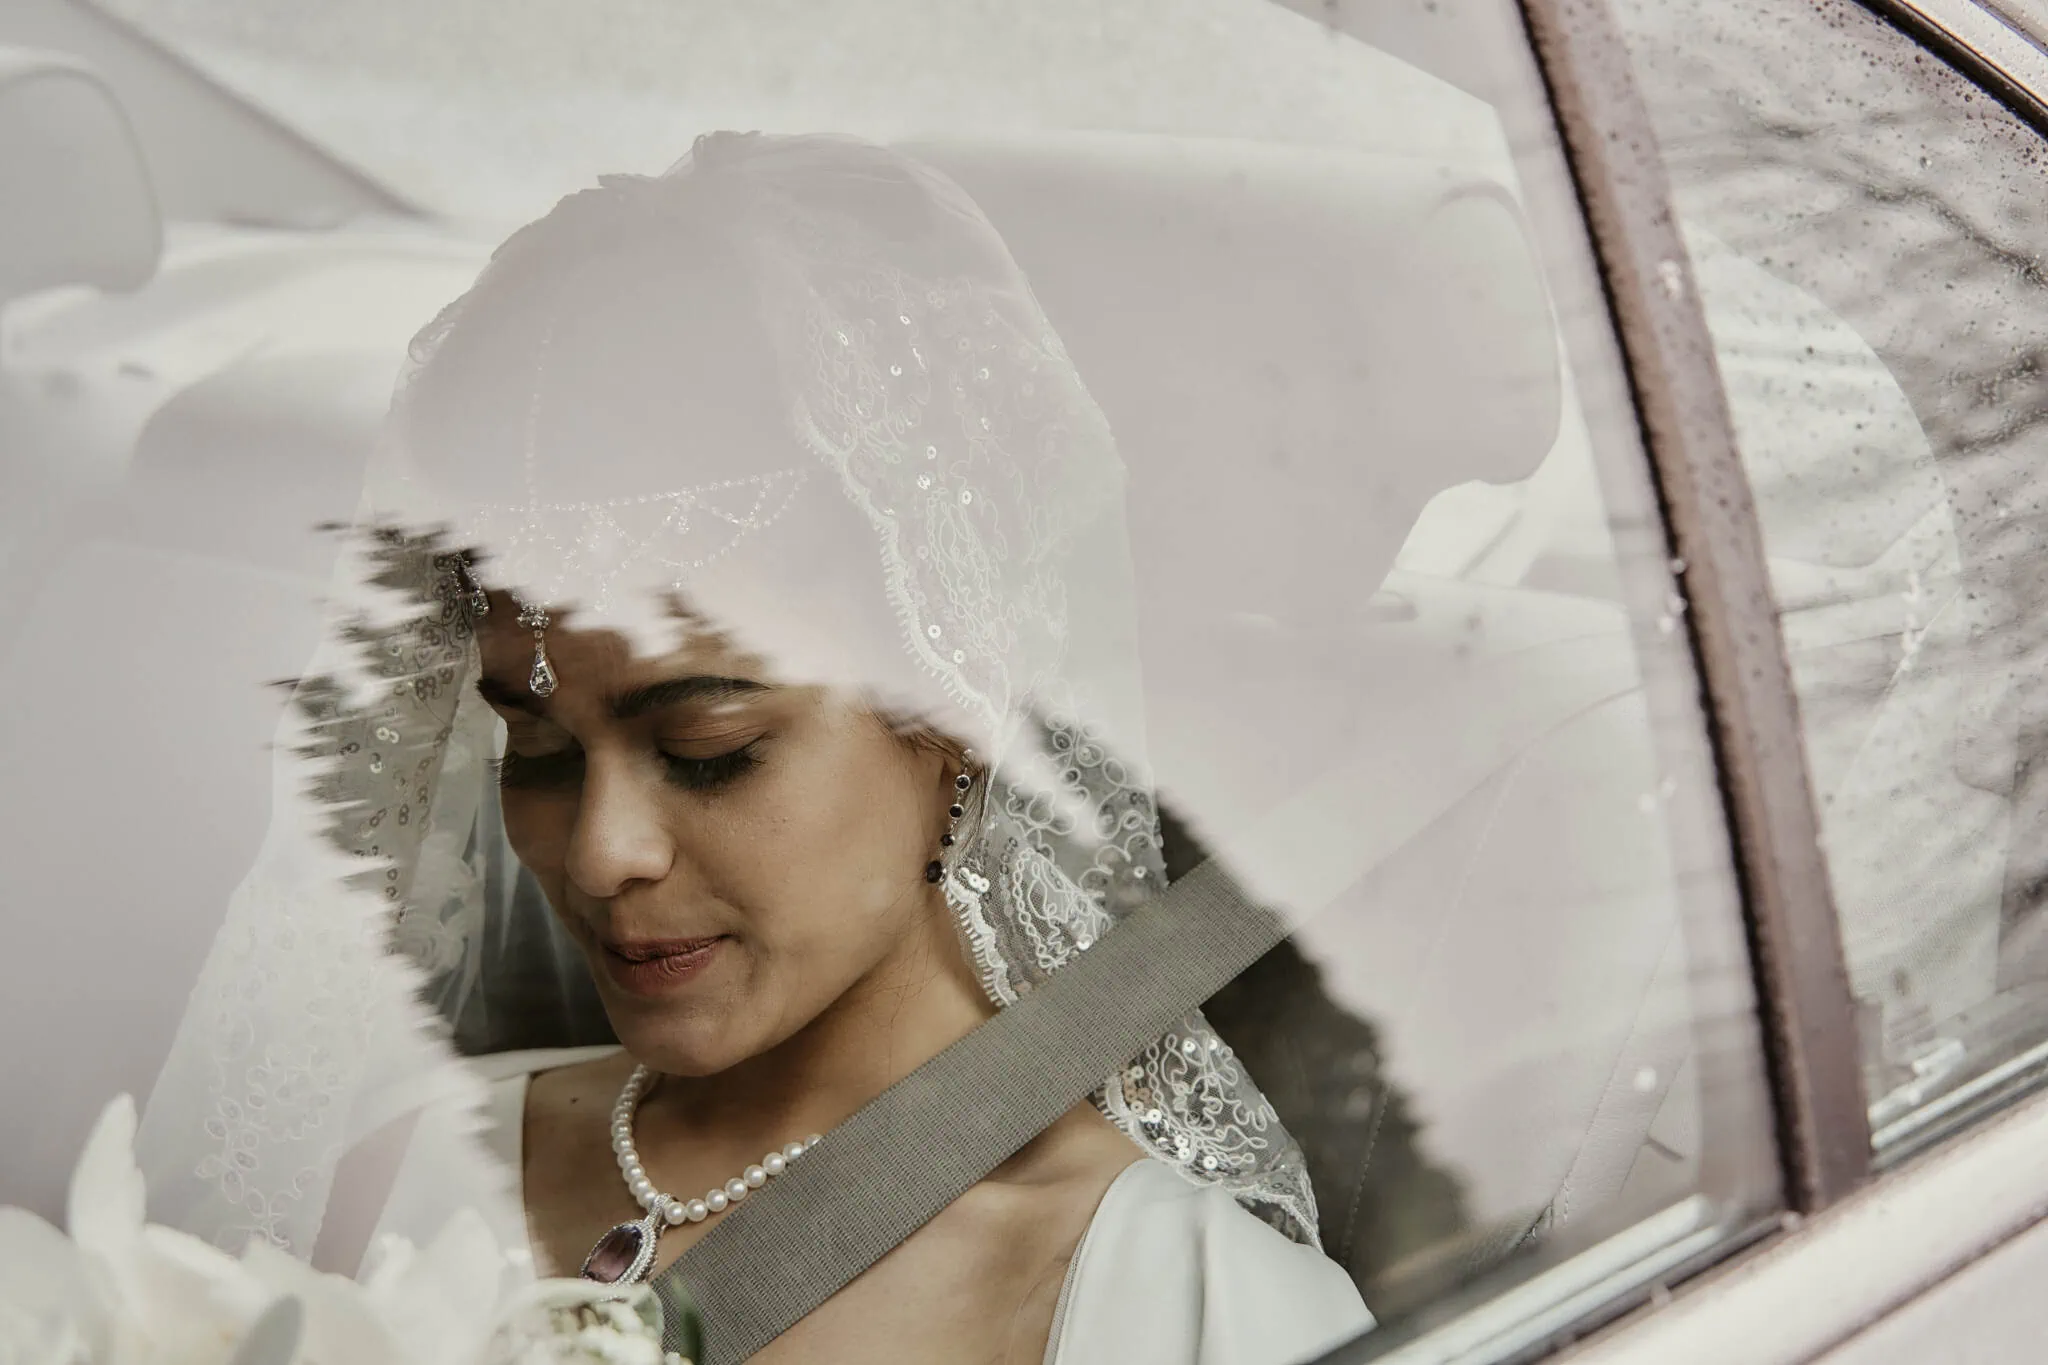 Queenstown New Zealand Elopement Wedding Photographer - A Queenstown Islamic bride is sitting in the back seat of a car.